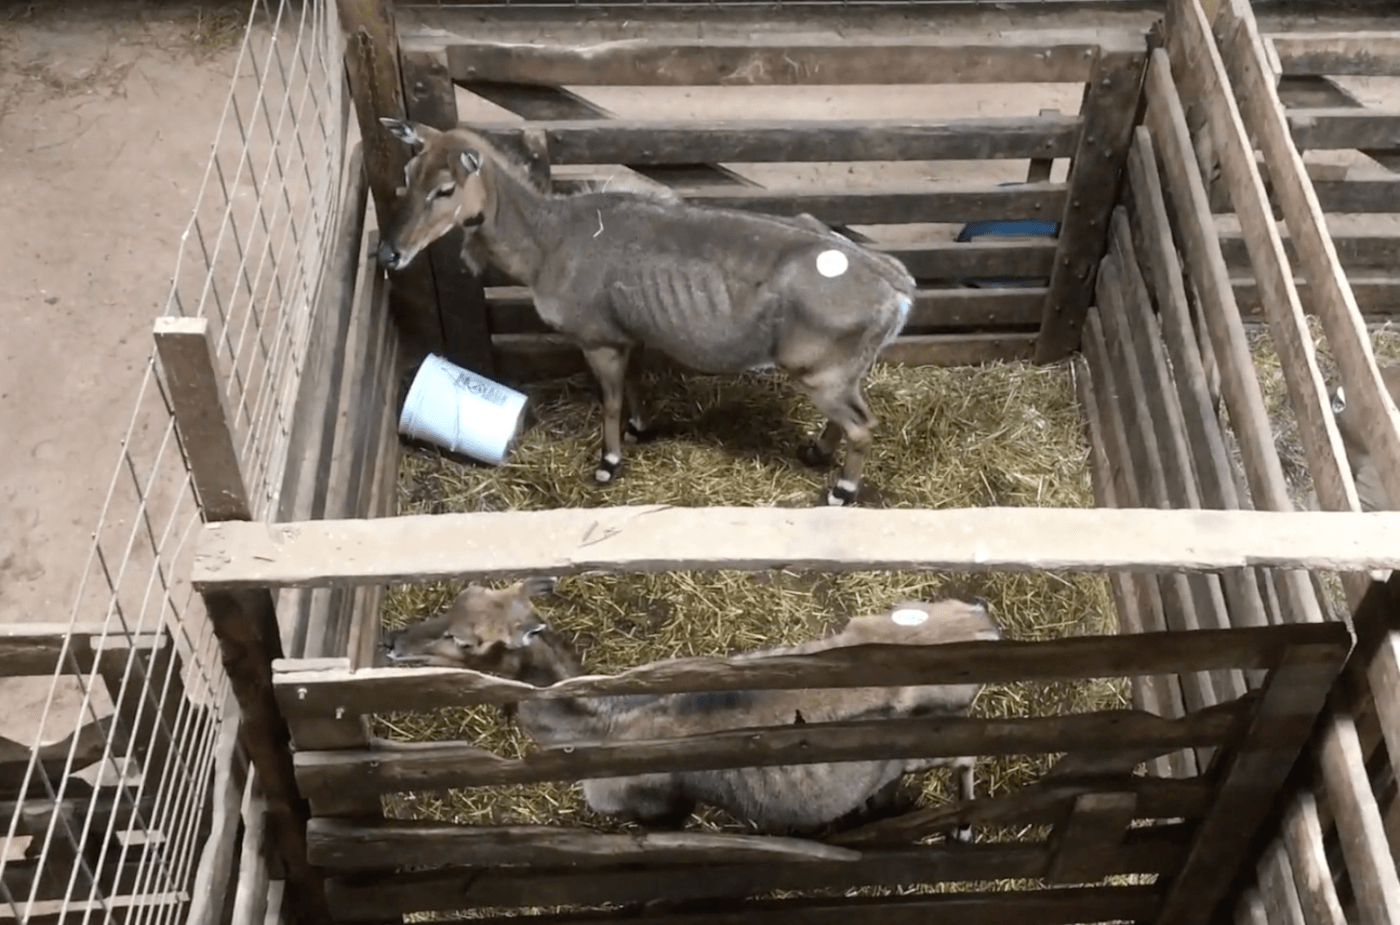 emaciated nilgai in a wooden pen and straw bedding at the mt. hope auction